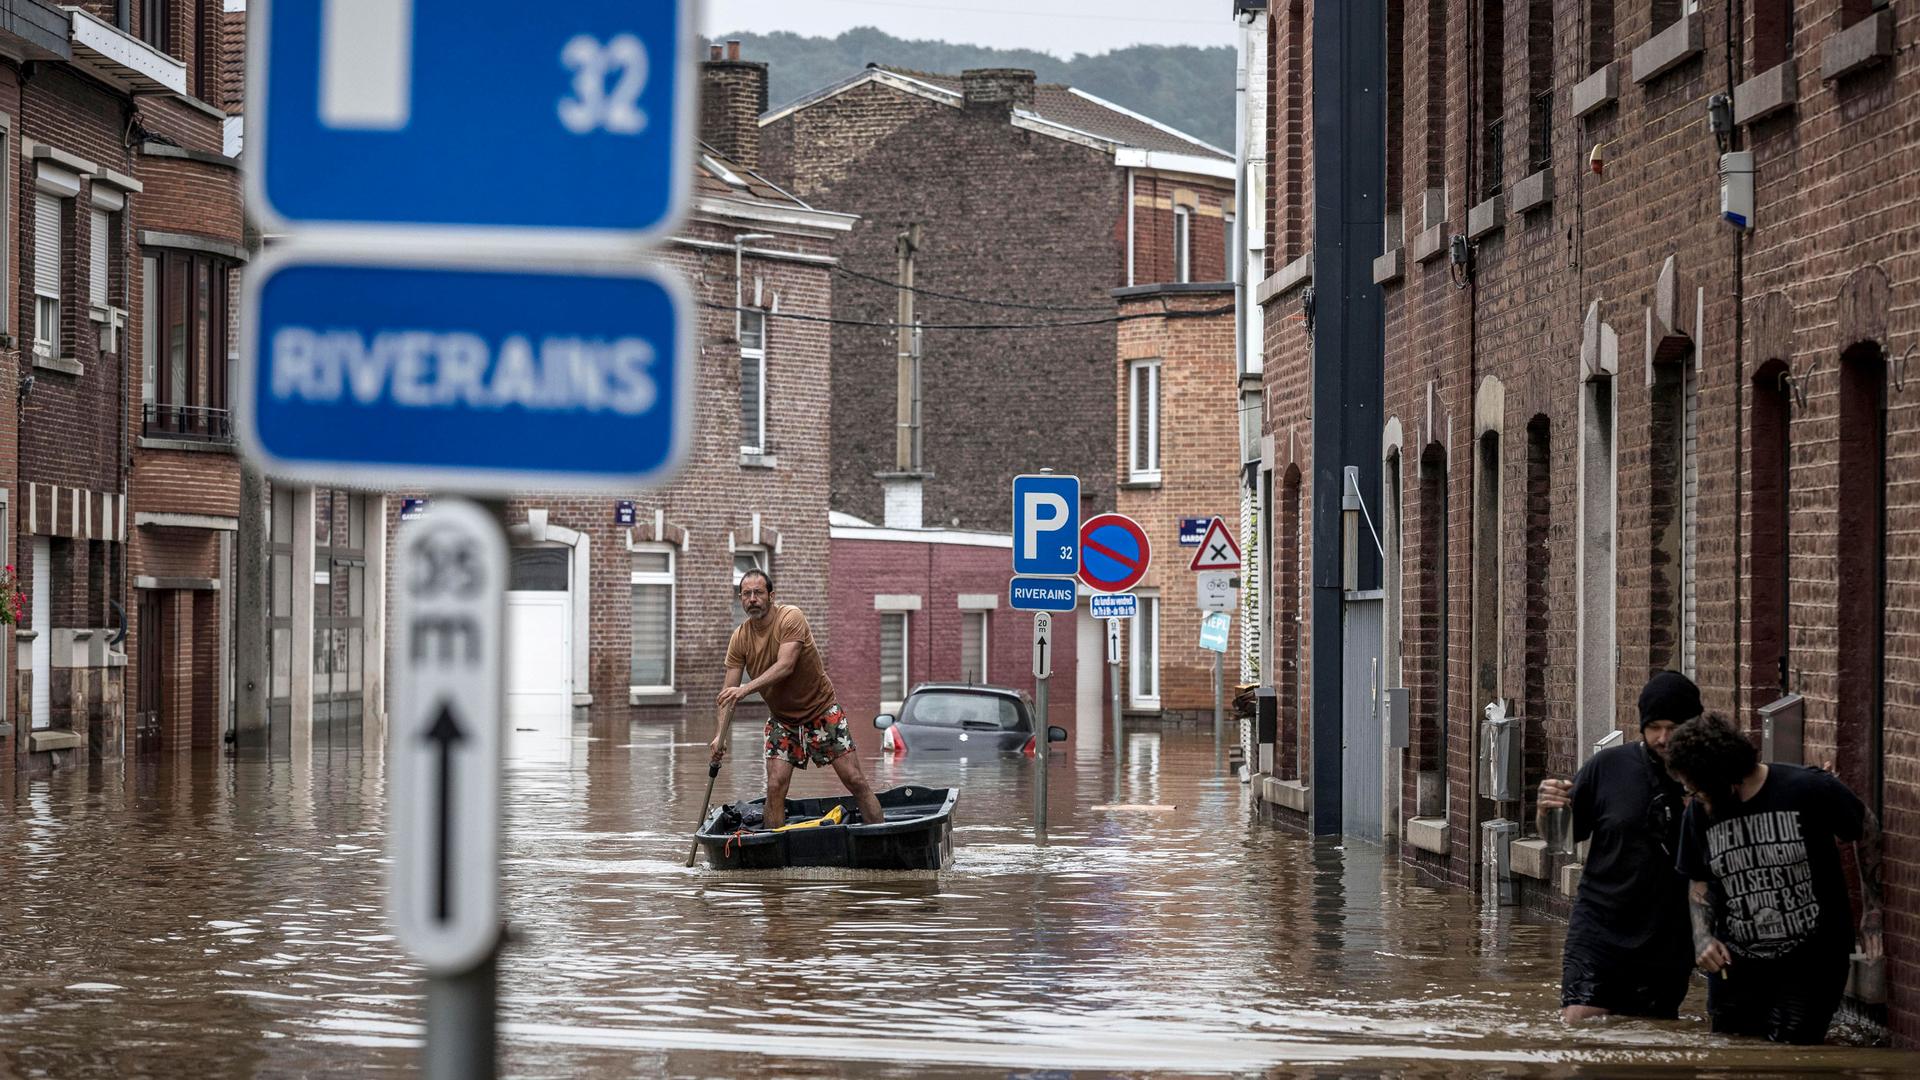 A man is shown standing in a canoe and rowing down an city street flooded by several feet.